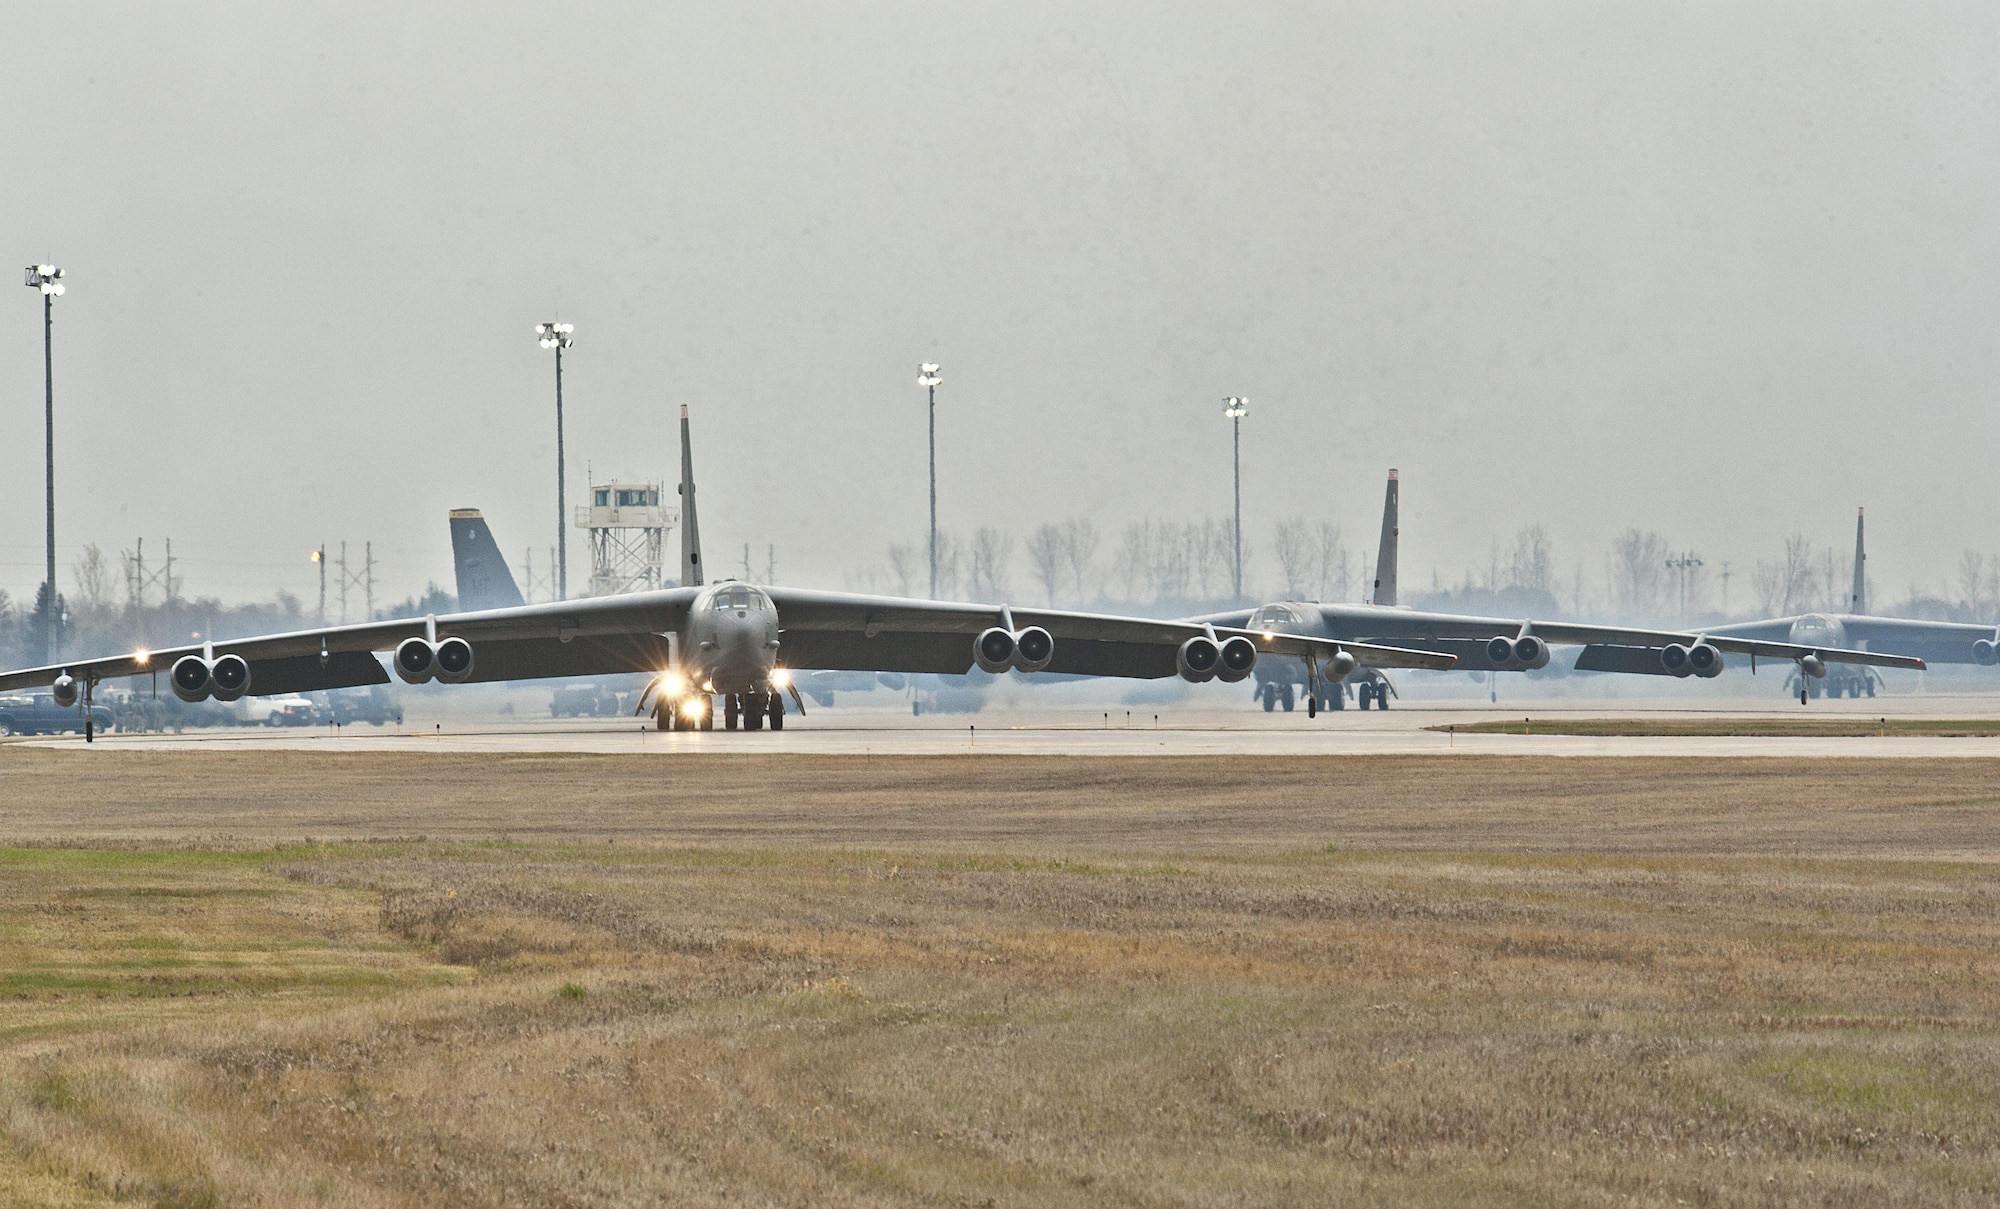 B-52H Stratofortresses assigned to Air Force Global Strike Command (AFGSC) prepare to take off from the runway at Minot Air Force Base, N.D., Oct. 30, 2016, during exercise Global Thunder 17. AFGSC supports U.S. Strategic Command's (USSTRATCOM) global strike and nuclear deterrence missions by providing strategic assets, including bombers like the B-52 and B-2, to ensure a safe, secure, effective and ready deterrent force. Global Thunder is an annual training event that assesses command and control functionality in all USSTRATCOM mission areas and affords component commands a venue to evaluate their joint operational readiness. (U.S. Air Force photo by Airman 1st Class Jonathan McElderry)